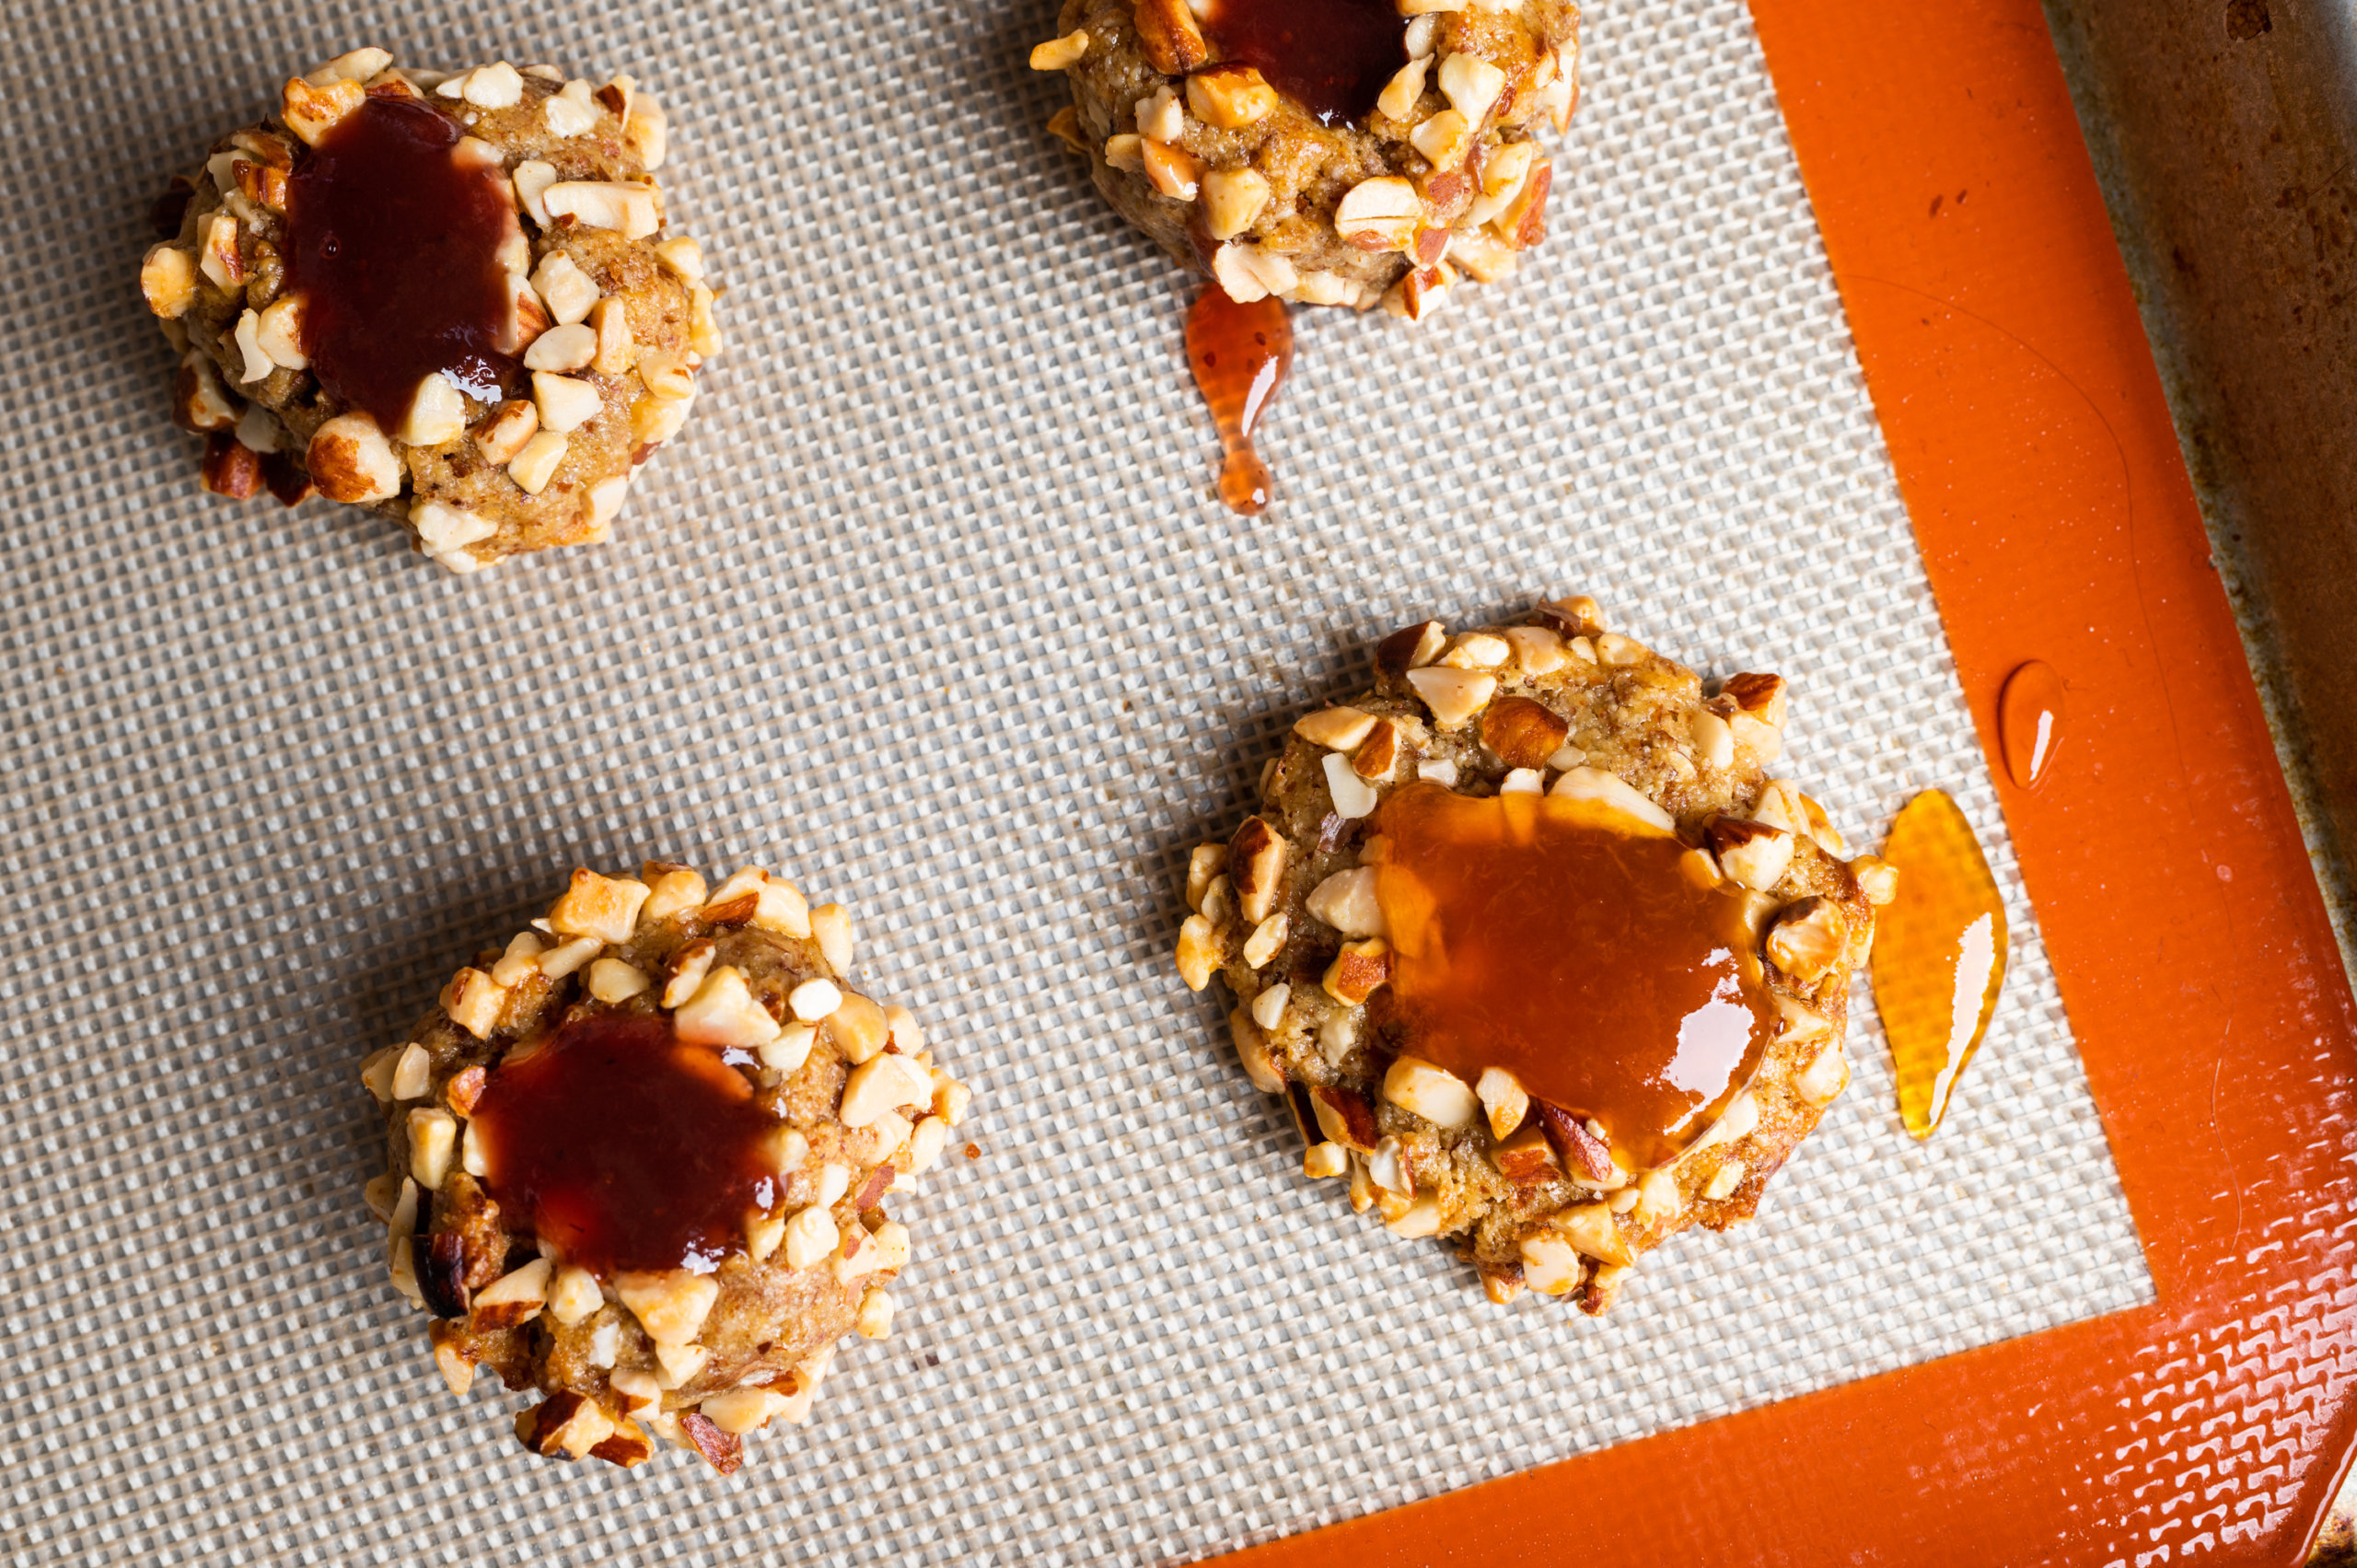 Details of almond thumbprint cookies filled with fruit jam